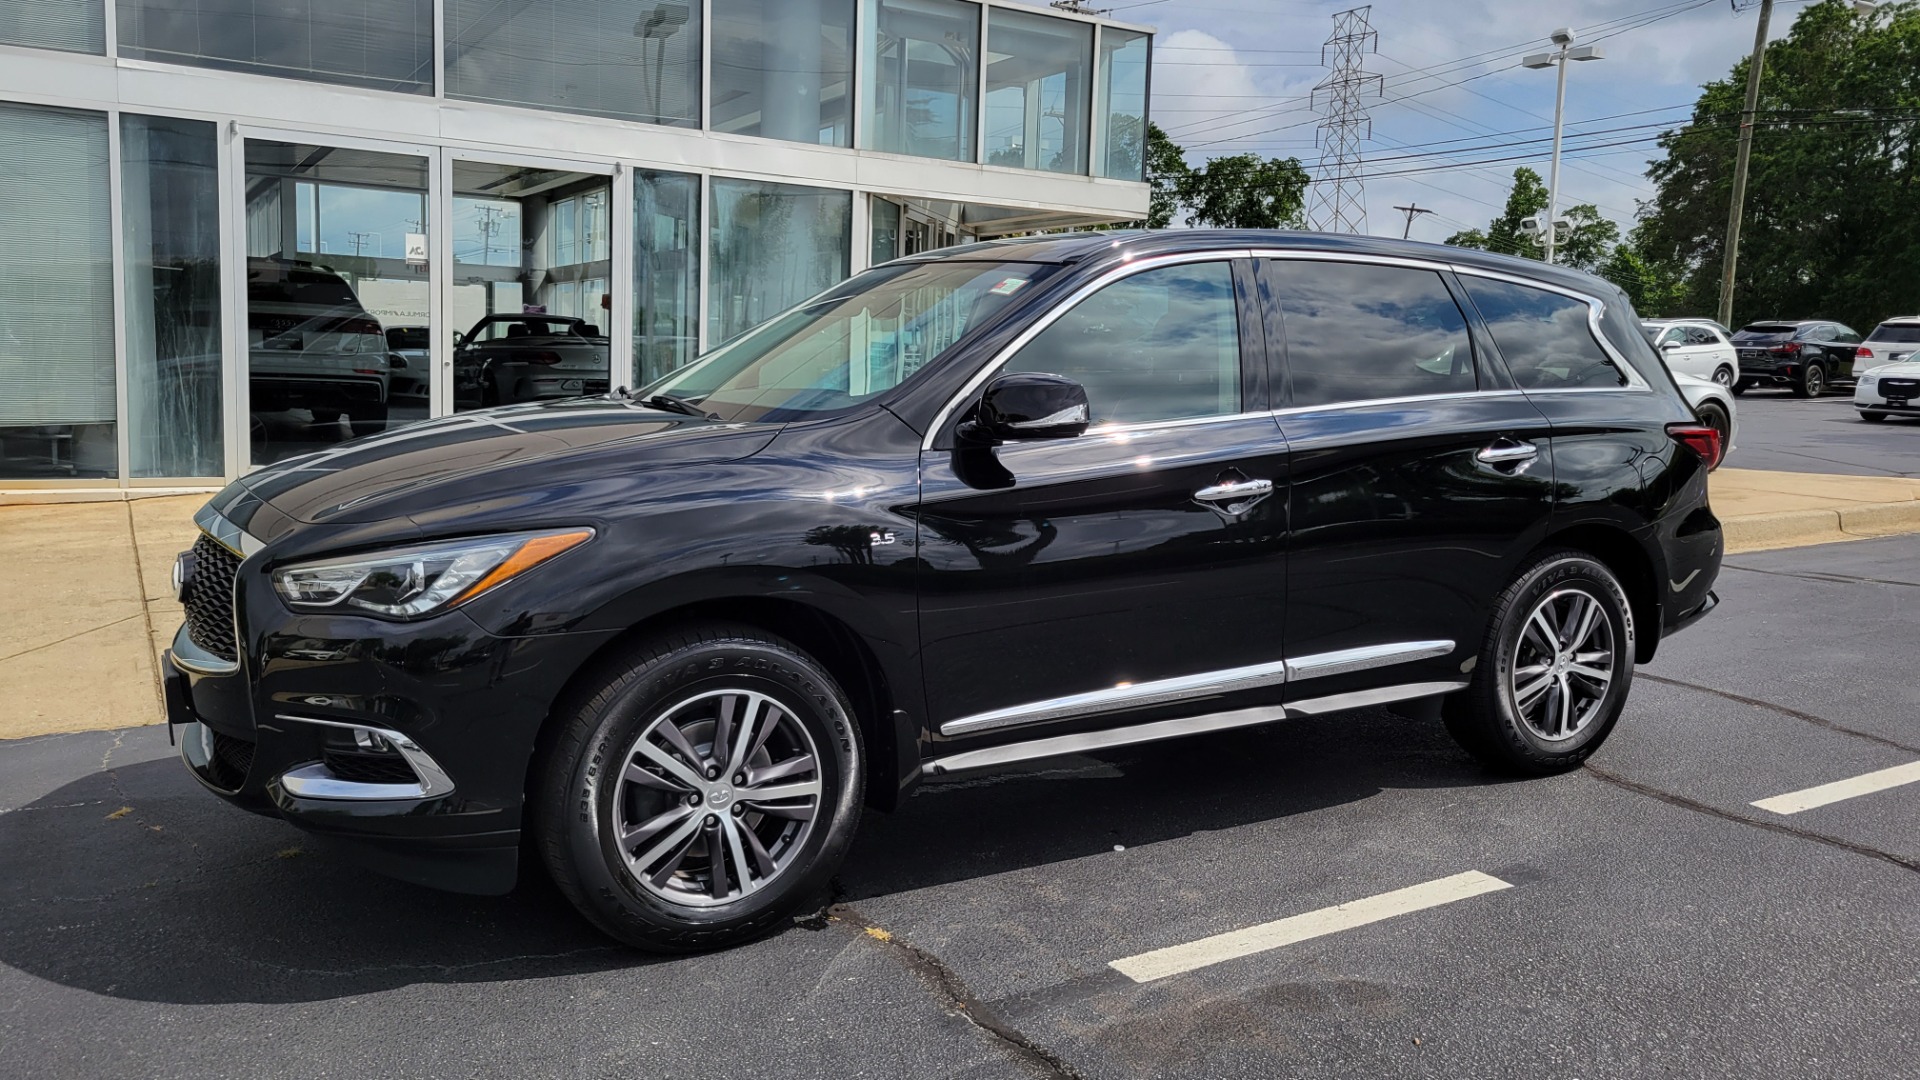 Used 2019 INFINITI QX60 PURE 3.5L / AWD / NAV / SUNROOF / 3-ROW / CAMERA for sale $35,795 at Formula Imports in Charlotte NC 28227 1